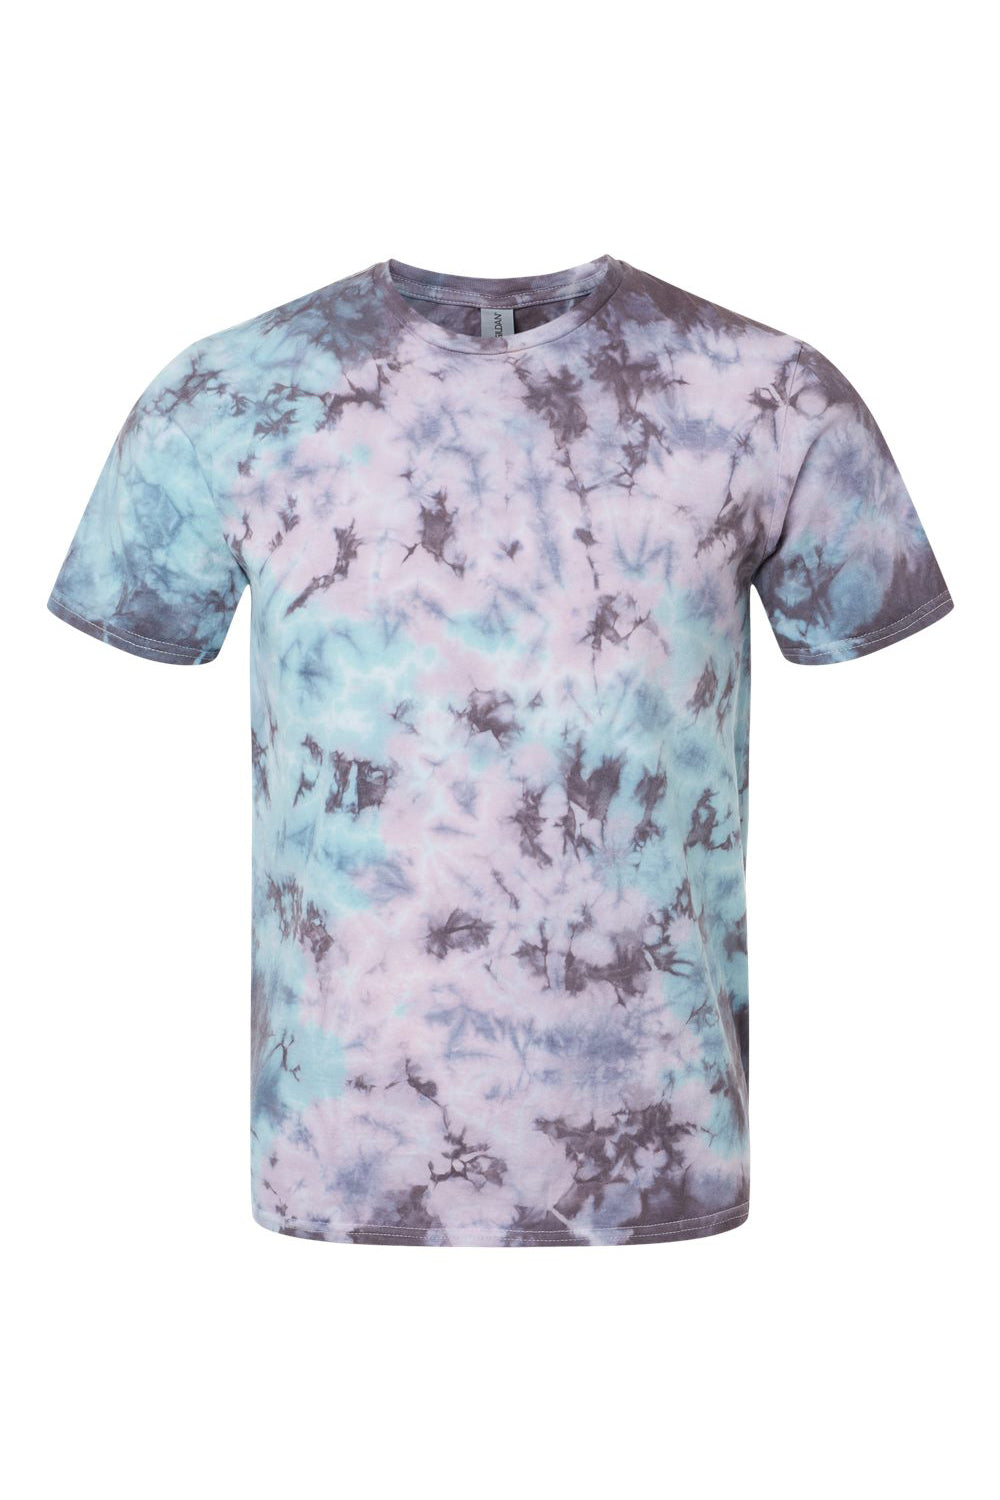 Dyenomite 640LM Mens LaMer Over Dyed Crinkle Tie Dyed Short Sleeve Crewneck T-Shirt Pacific Flat Front